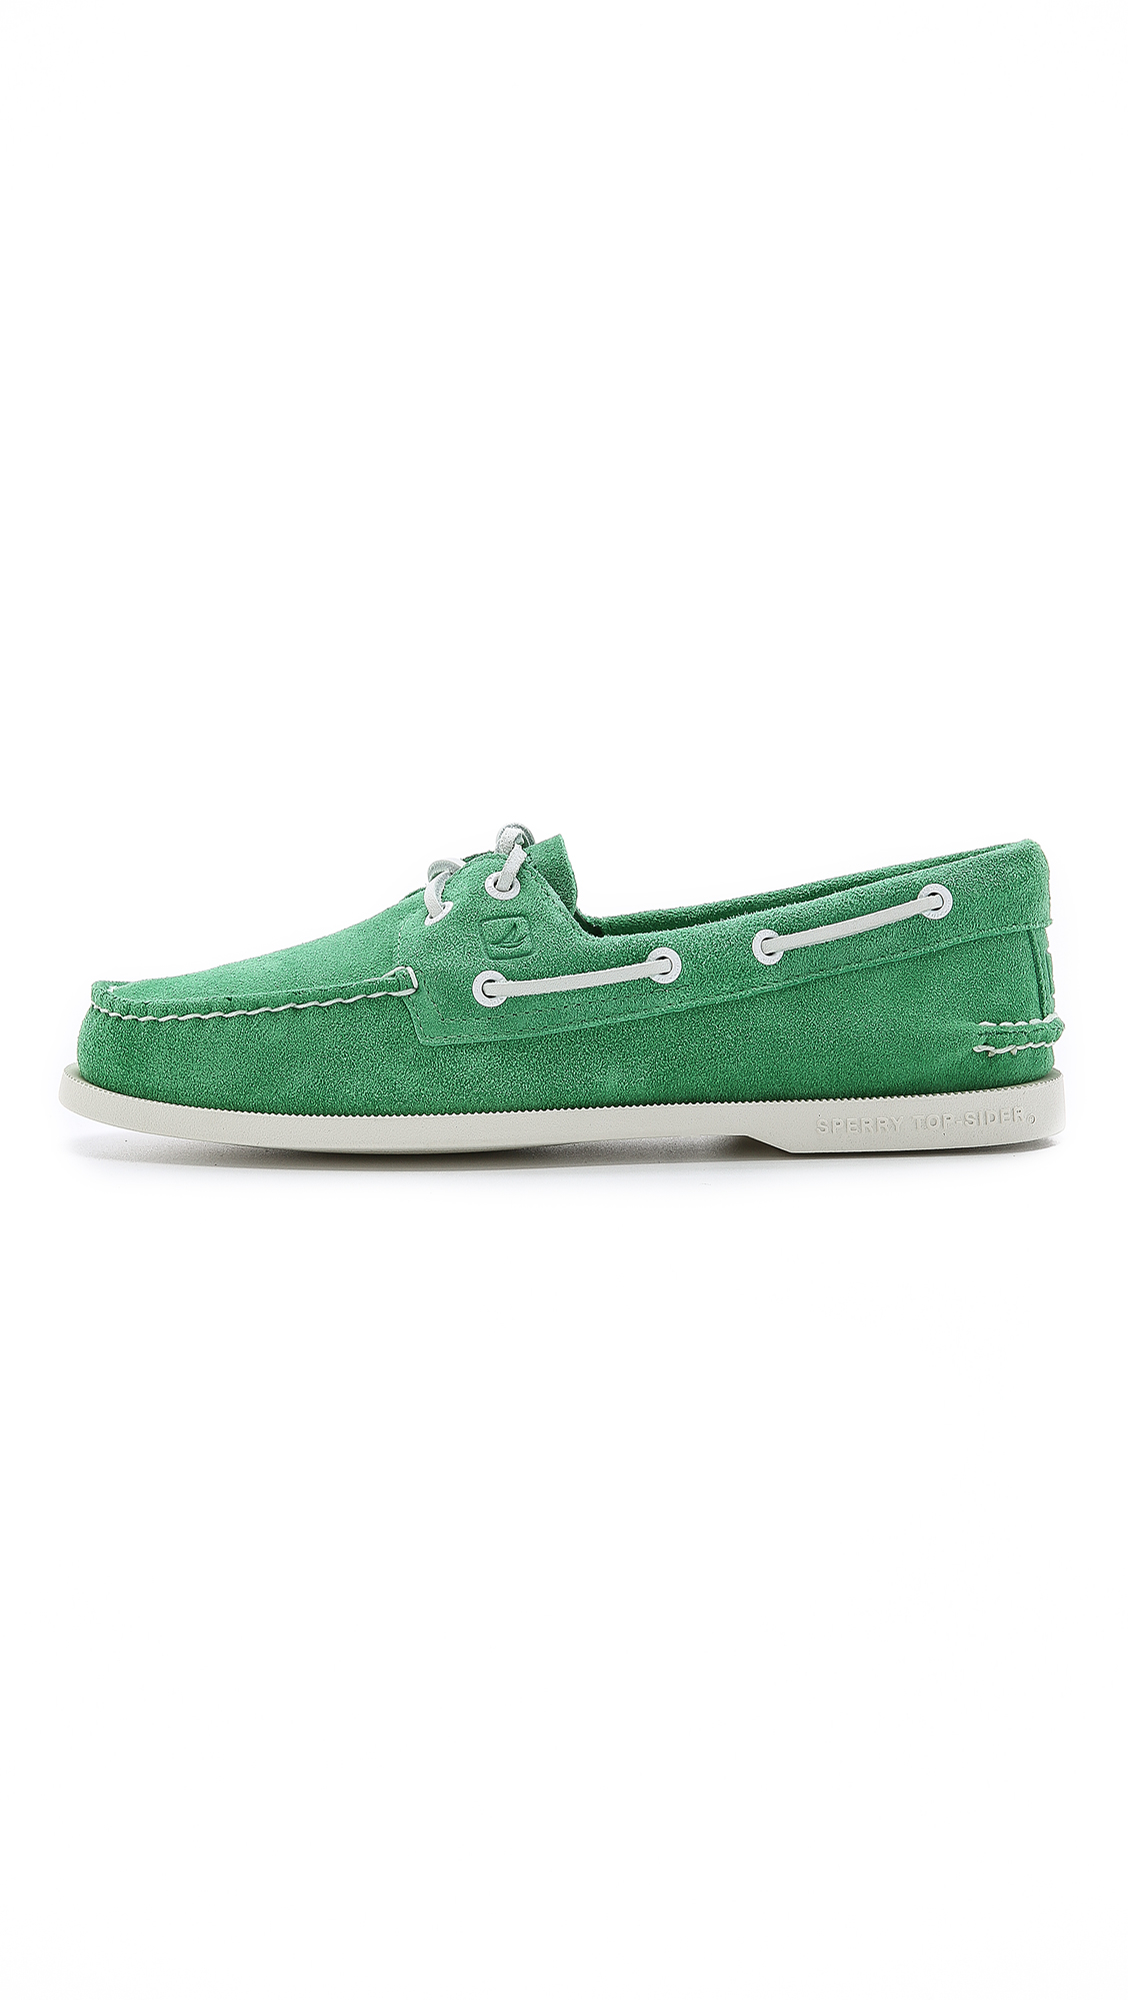 Lyst - Sperry Top-Sider A/o 2-eye Suede Boat Shoes in Green for Men